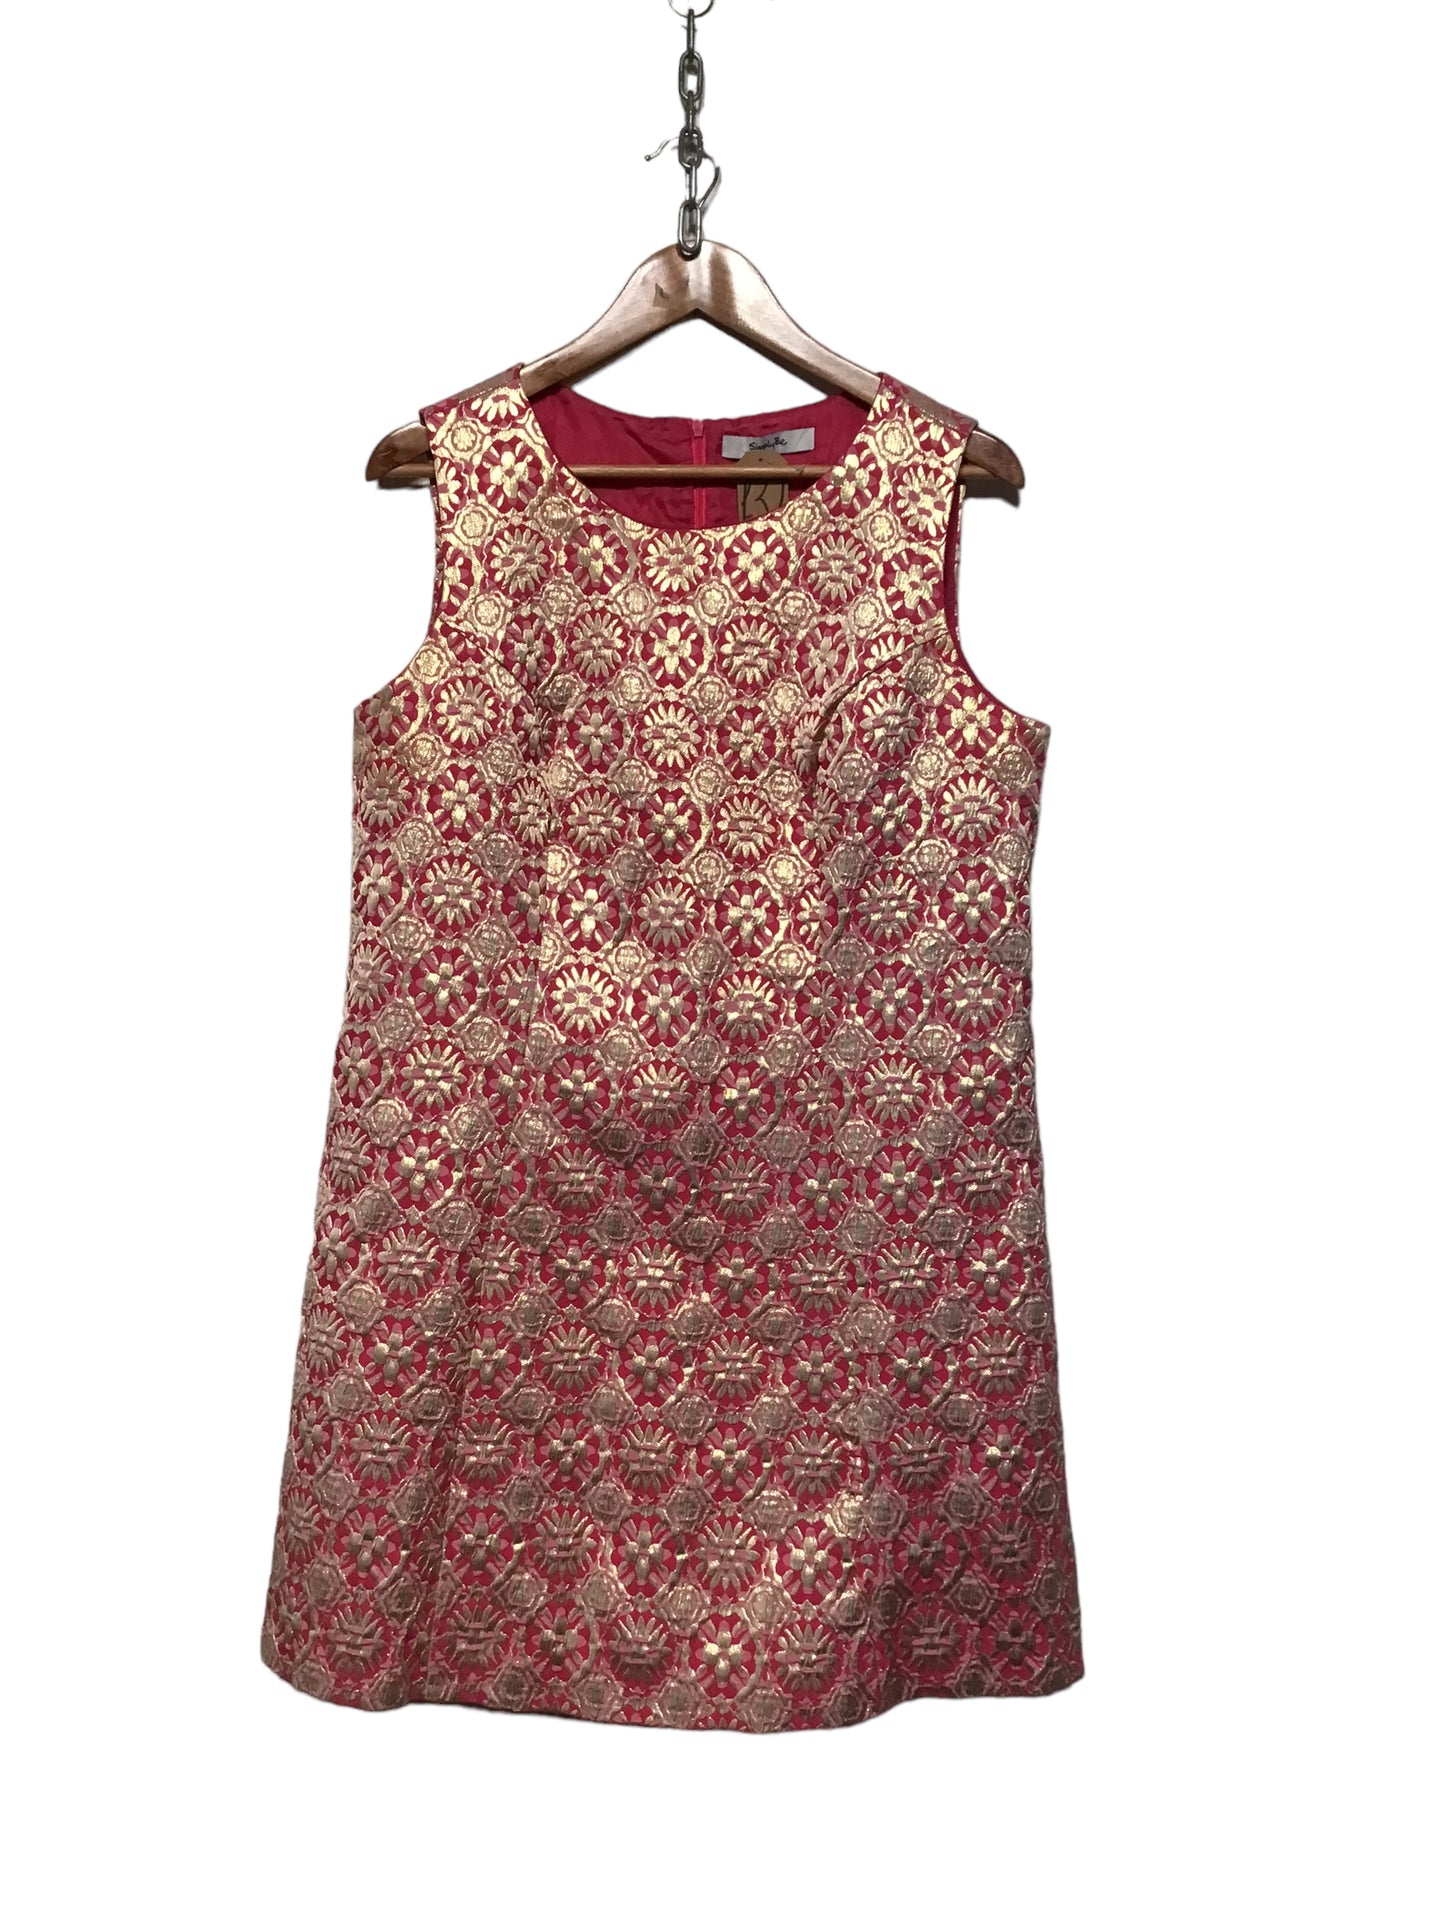 SimplyBe Embroidered Dress (Size XXL)